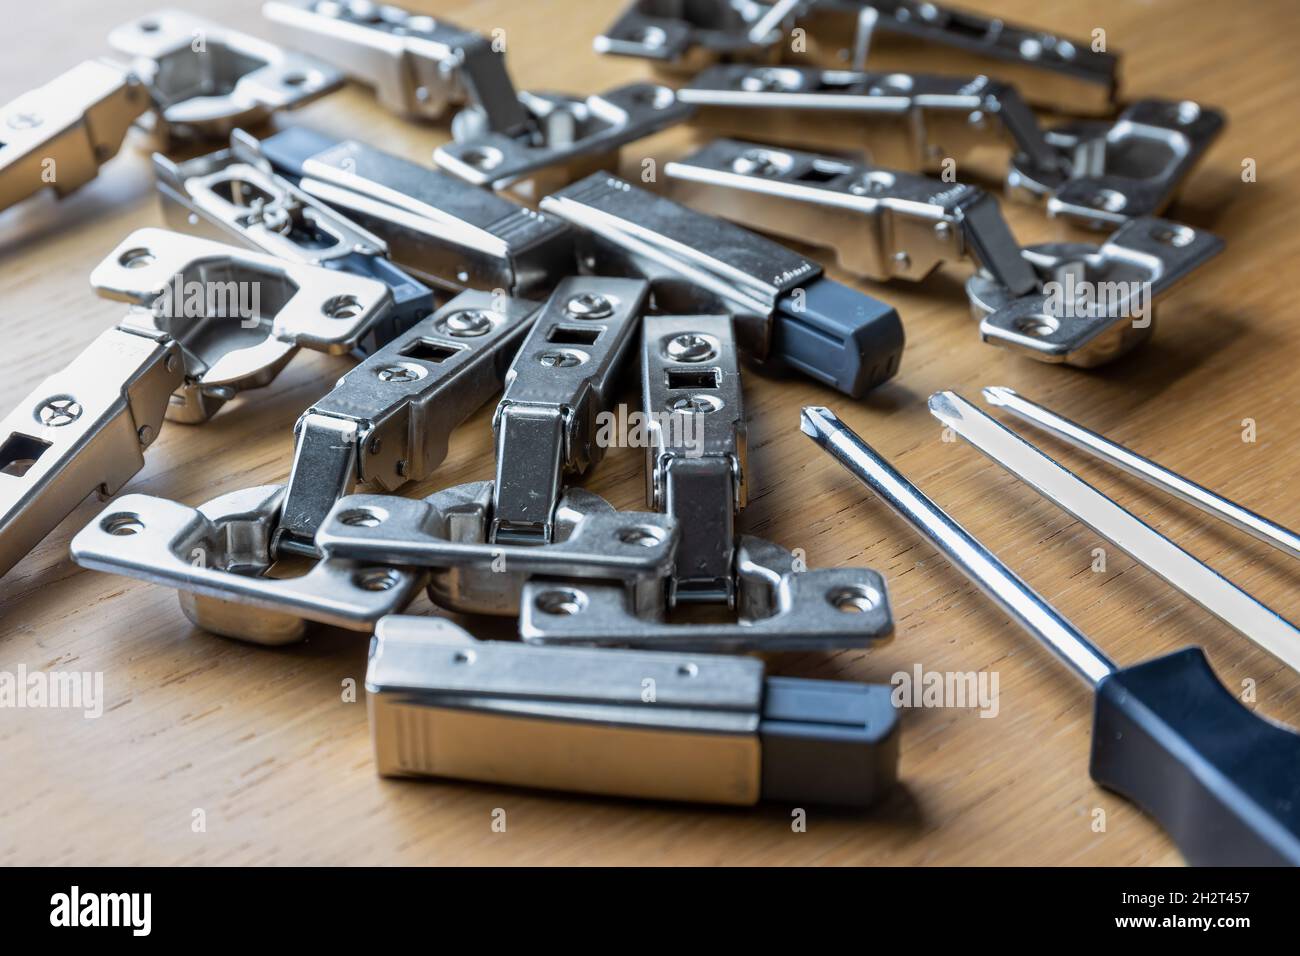 A pile of soft close cabinet door hinges and screwdrivers Stock Photo